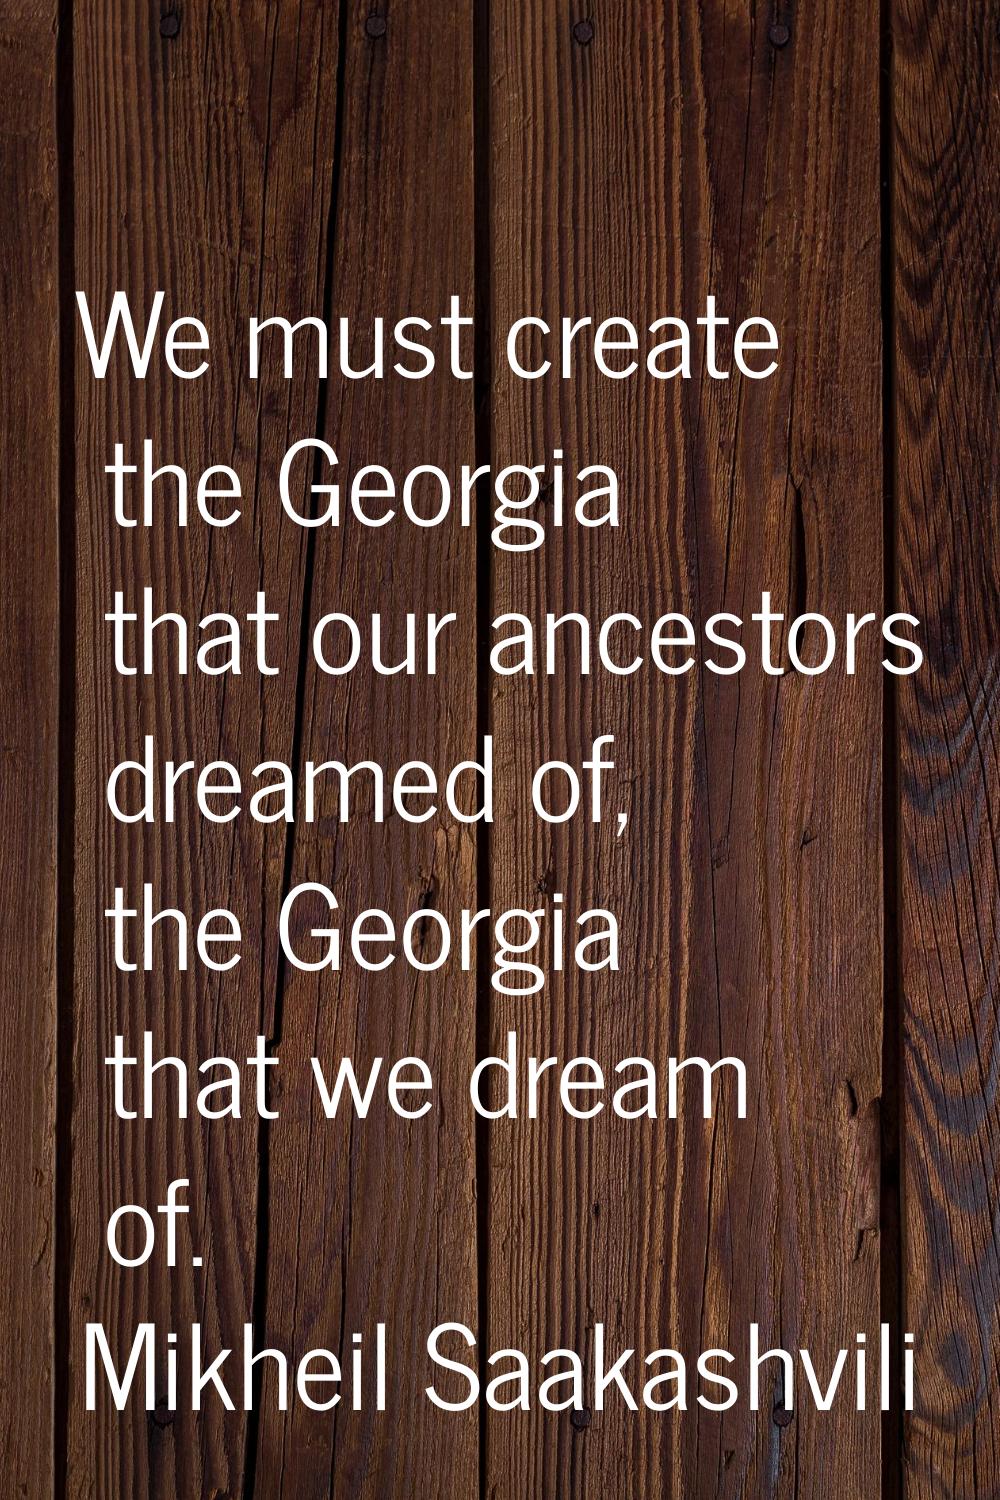 We must create the Georgia that our ancestors dreamed of, the Georgia that we dream of.